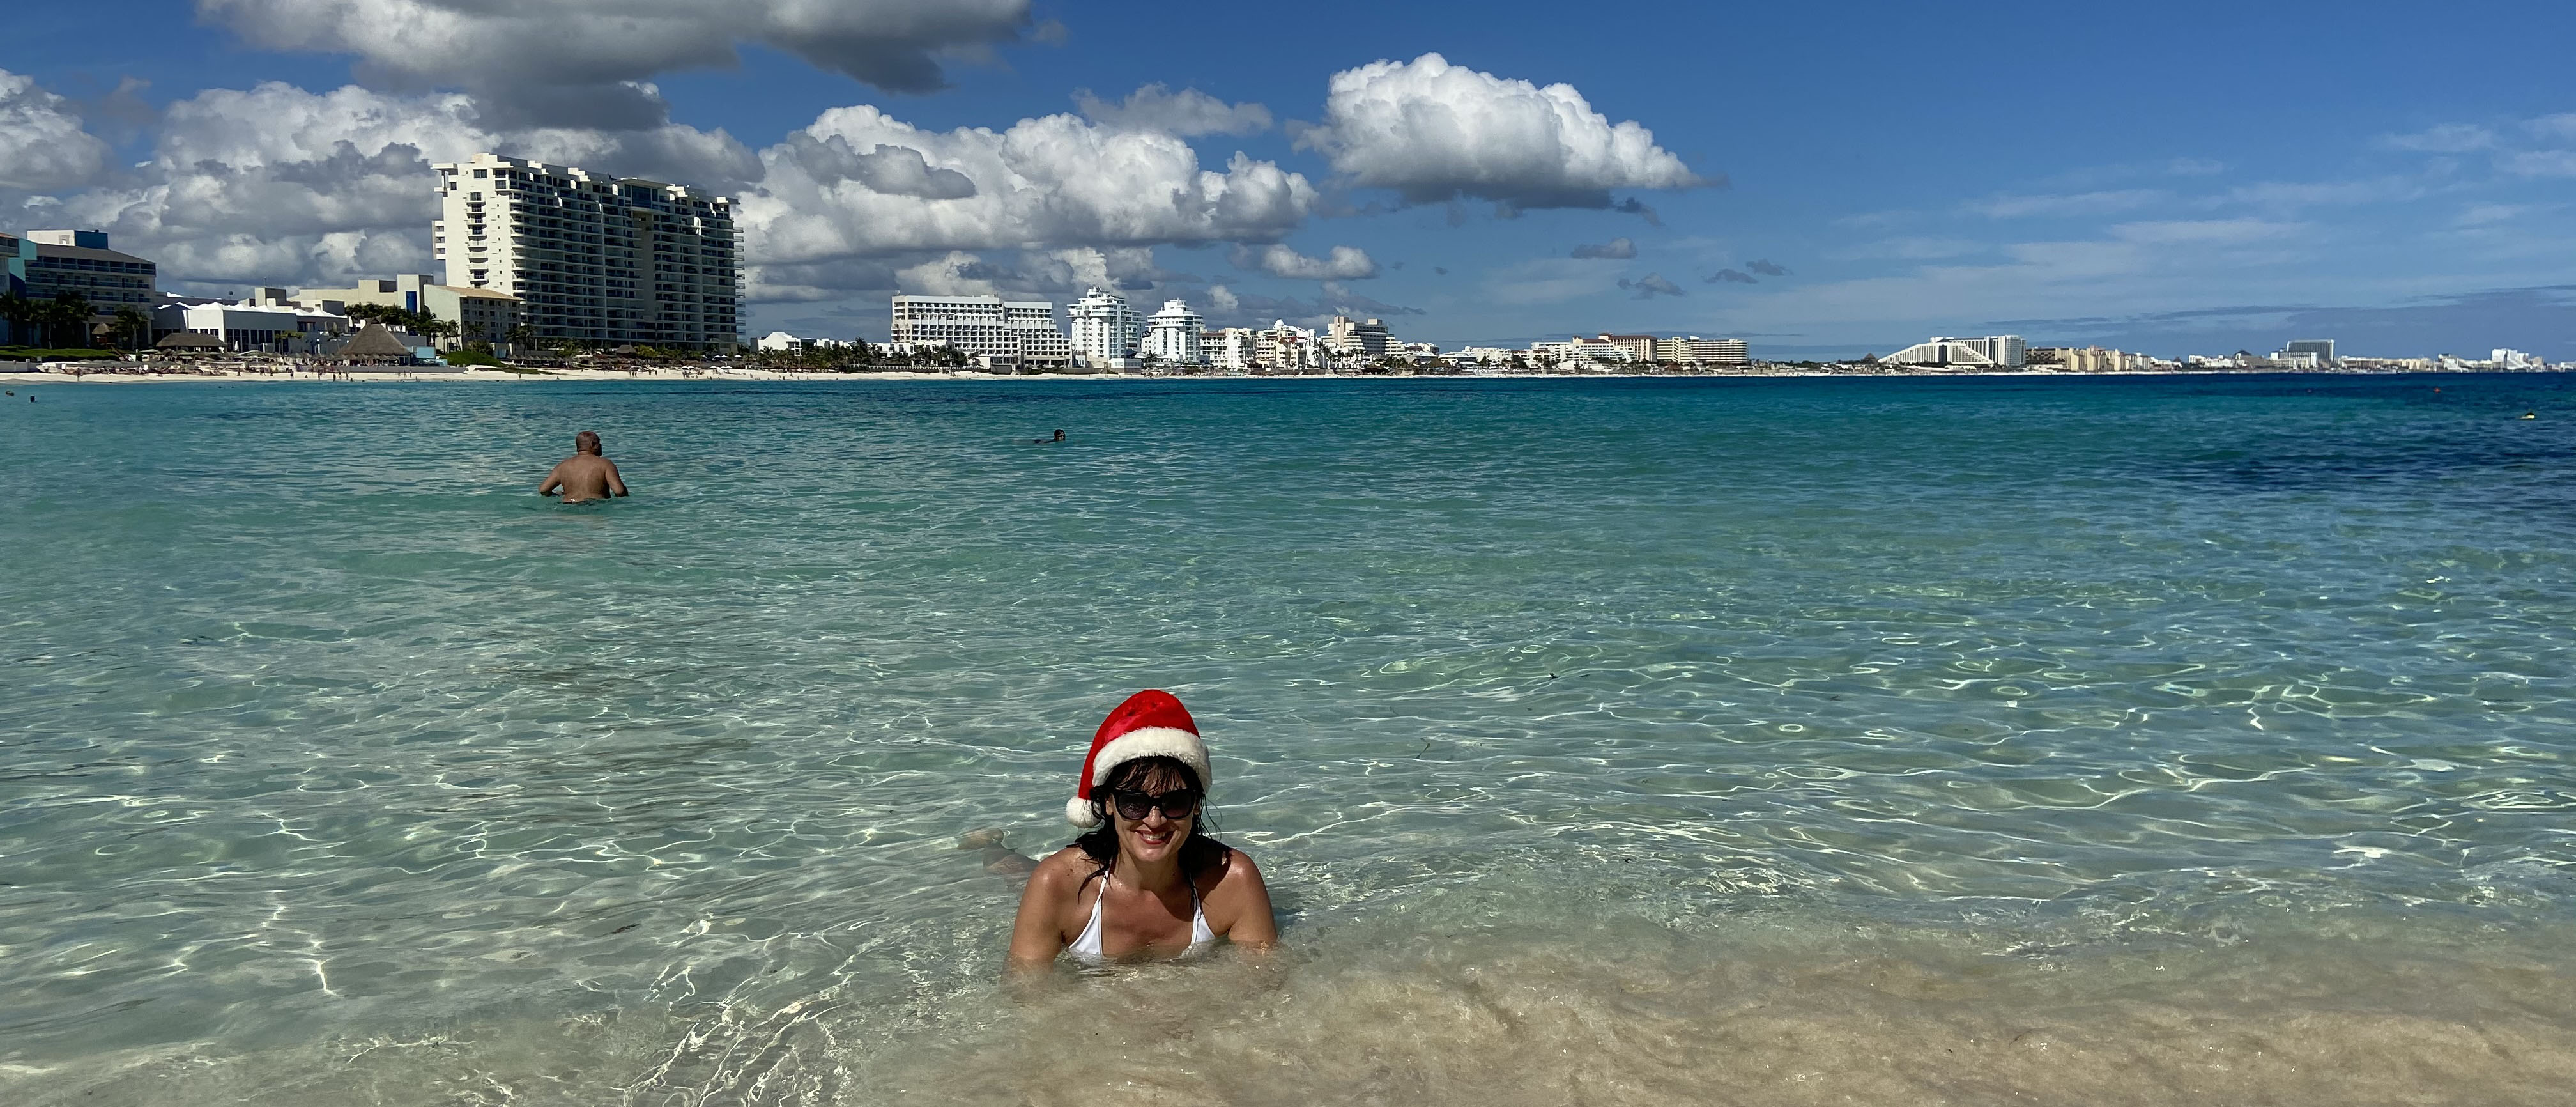 My wife with the Christmas cap in water